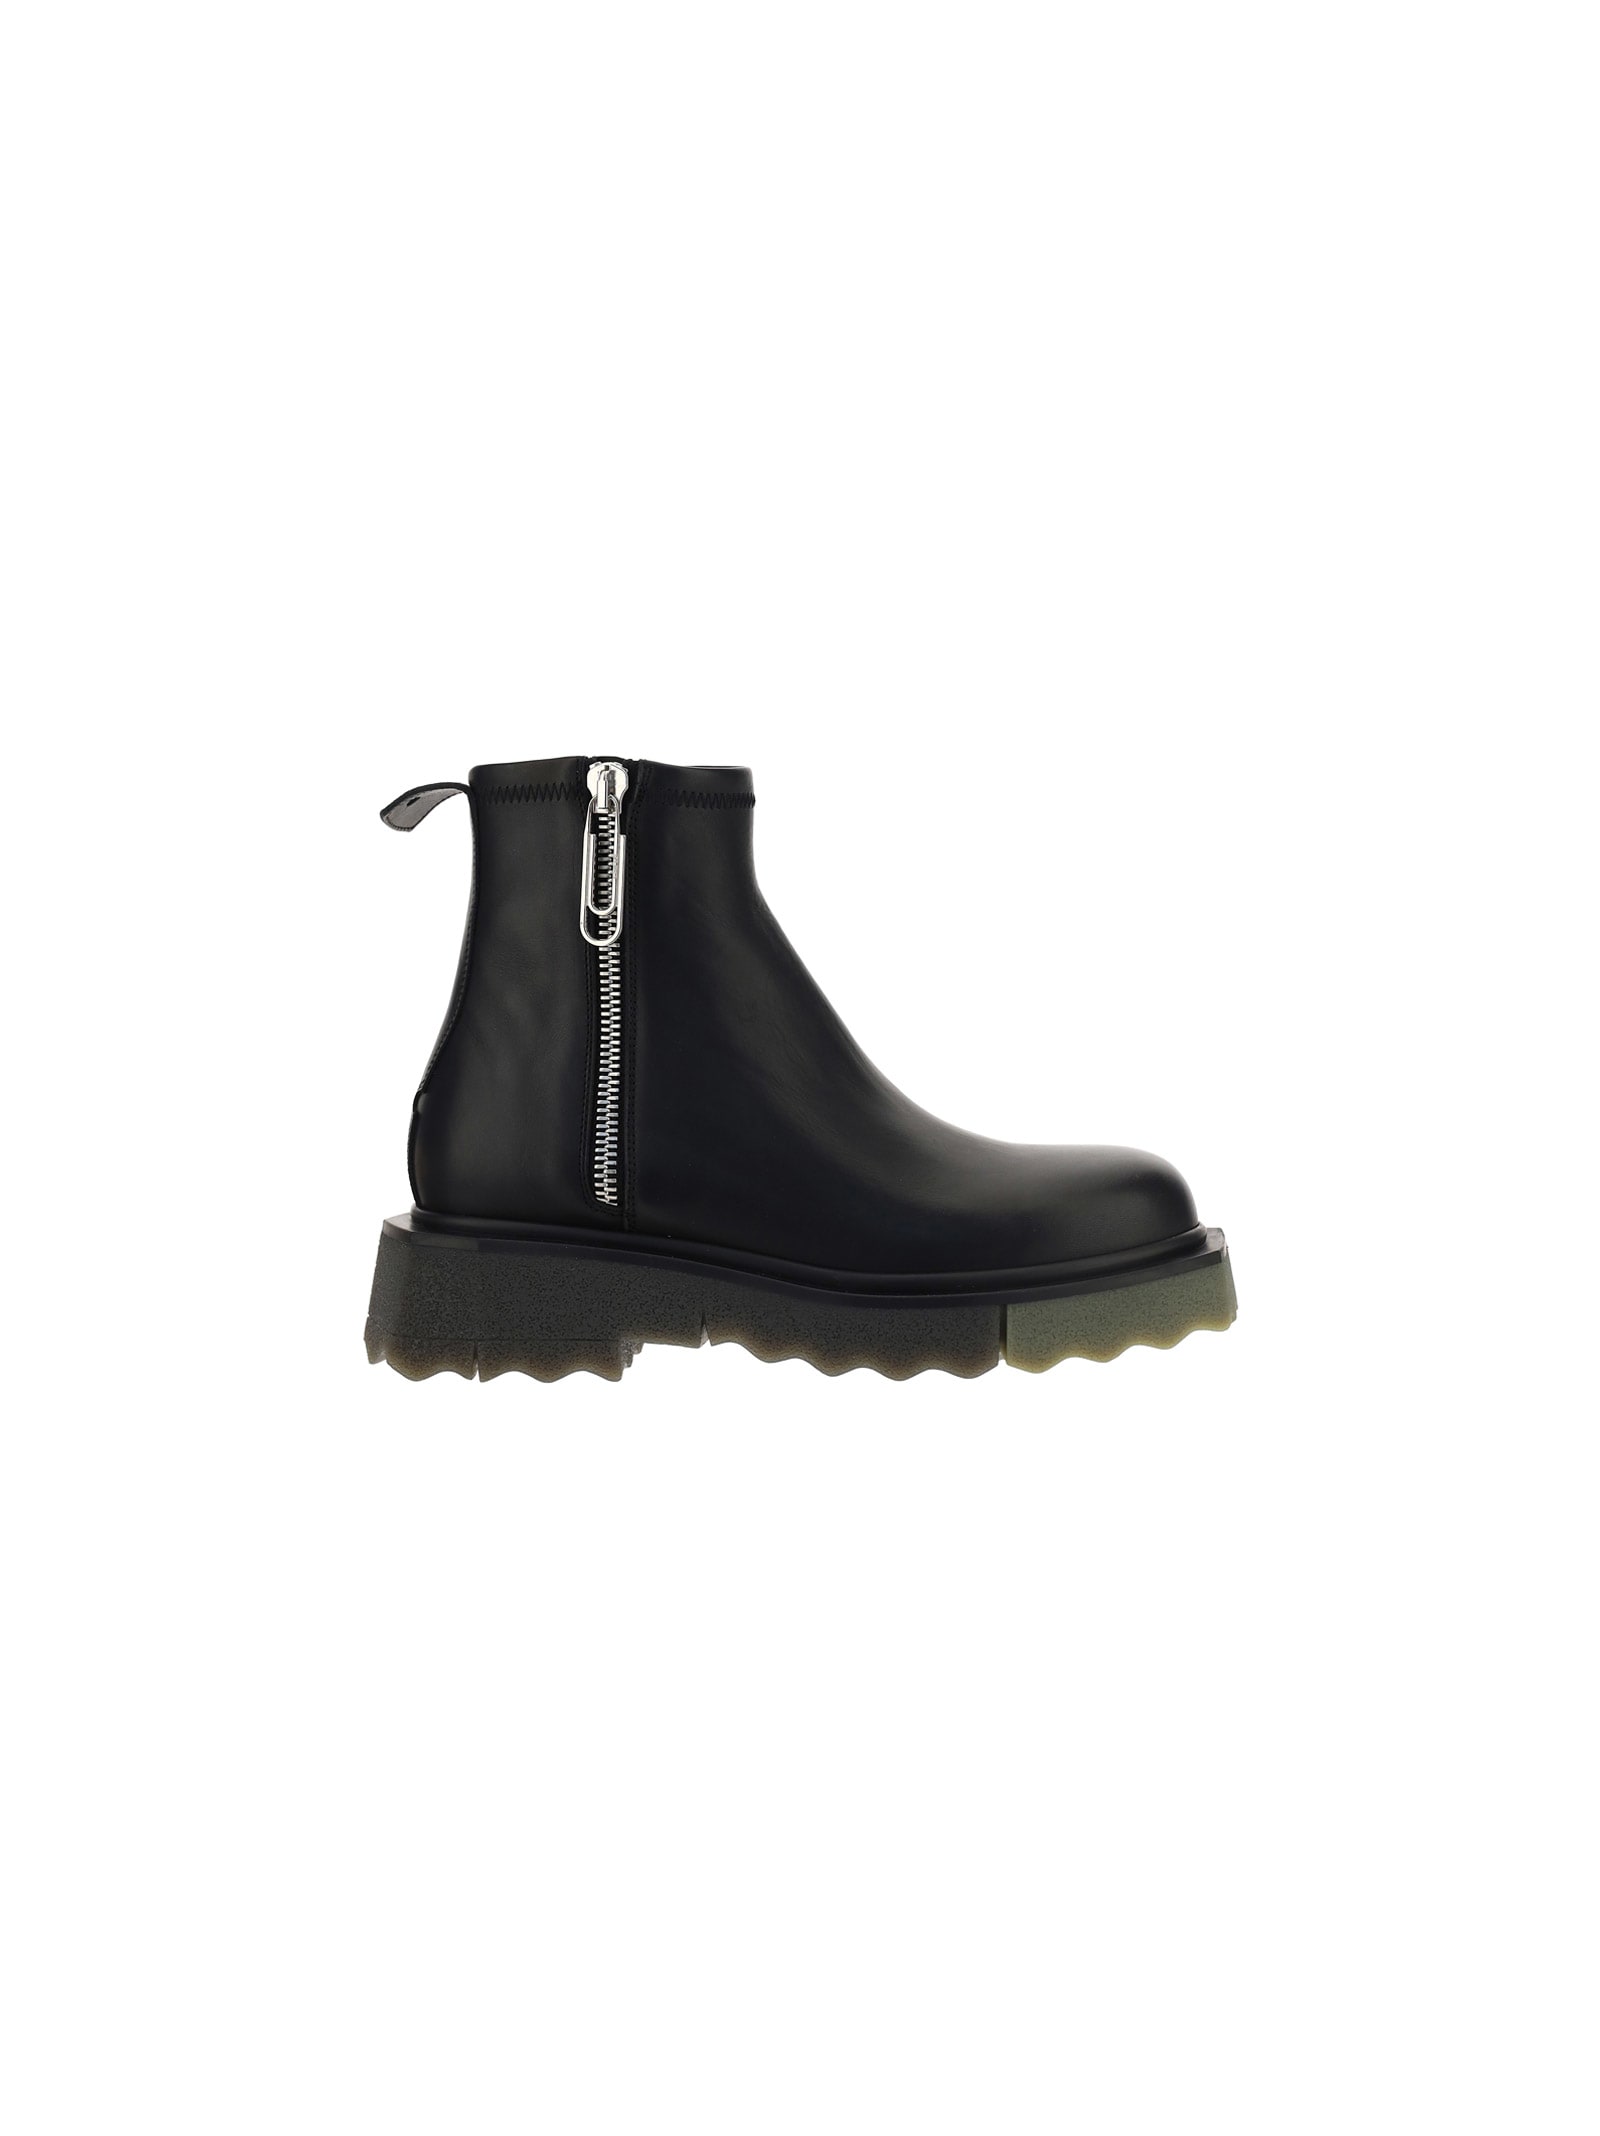 Off-White Sponge Sole Leather Boots